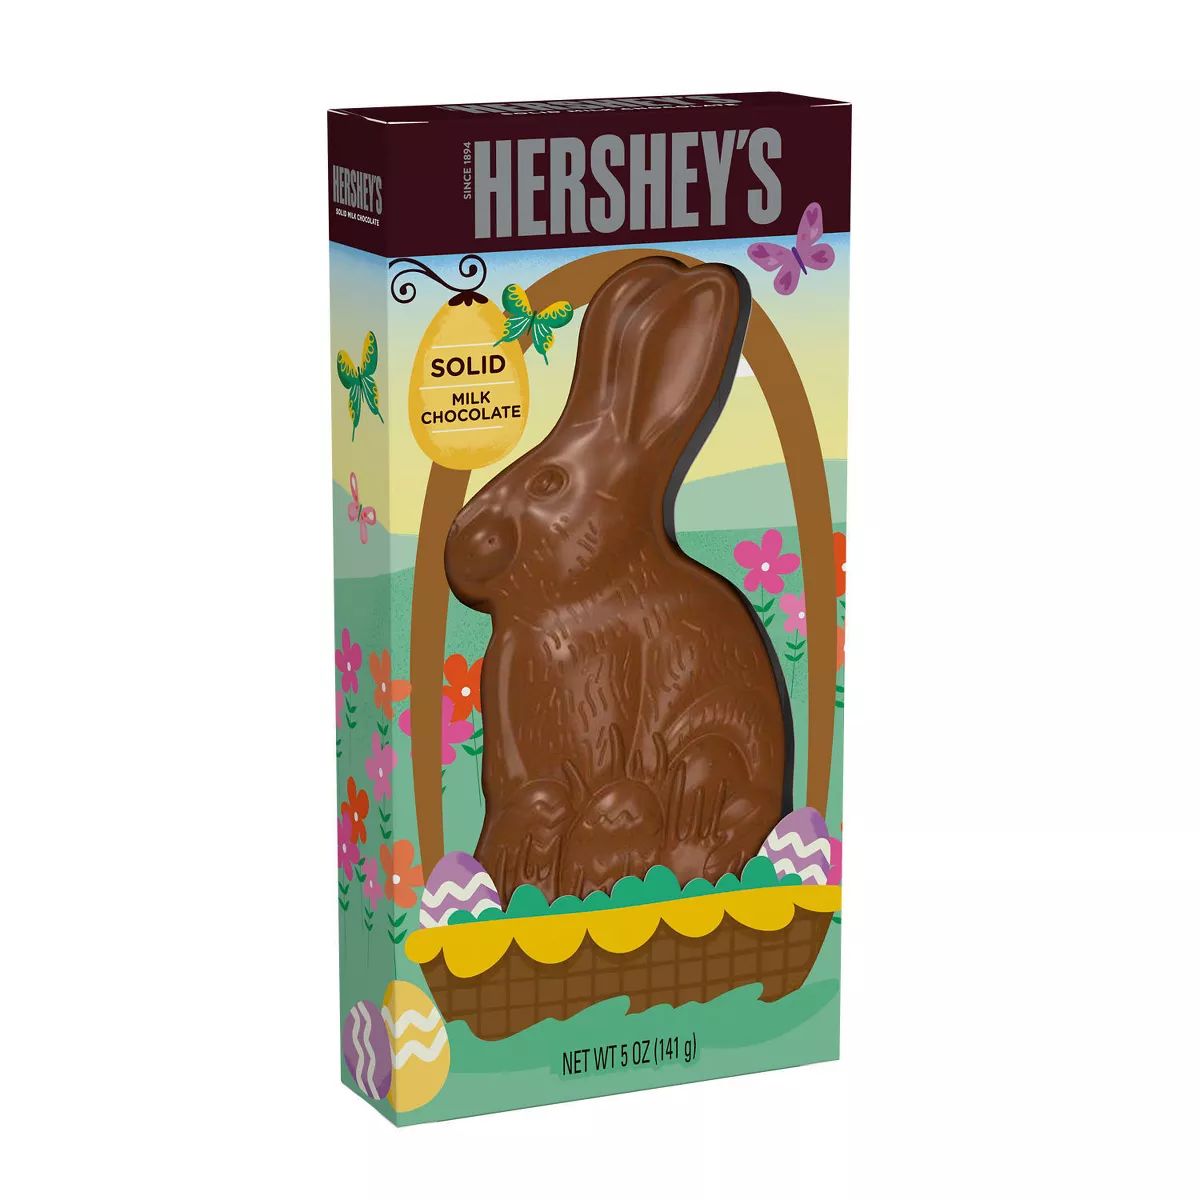 Hershey's Milk Chocolate Solid Bunny Easter Candy Gift Box - 5oz | Target